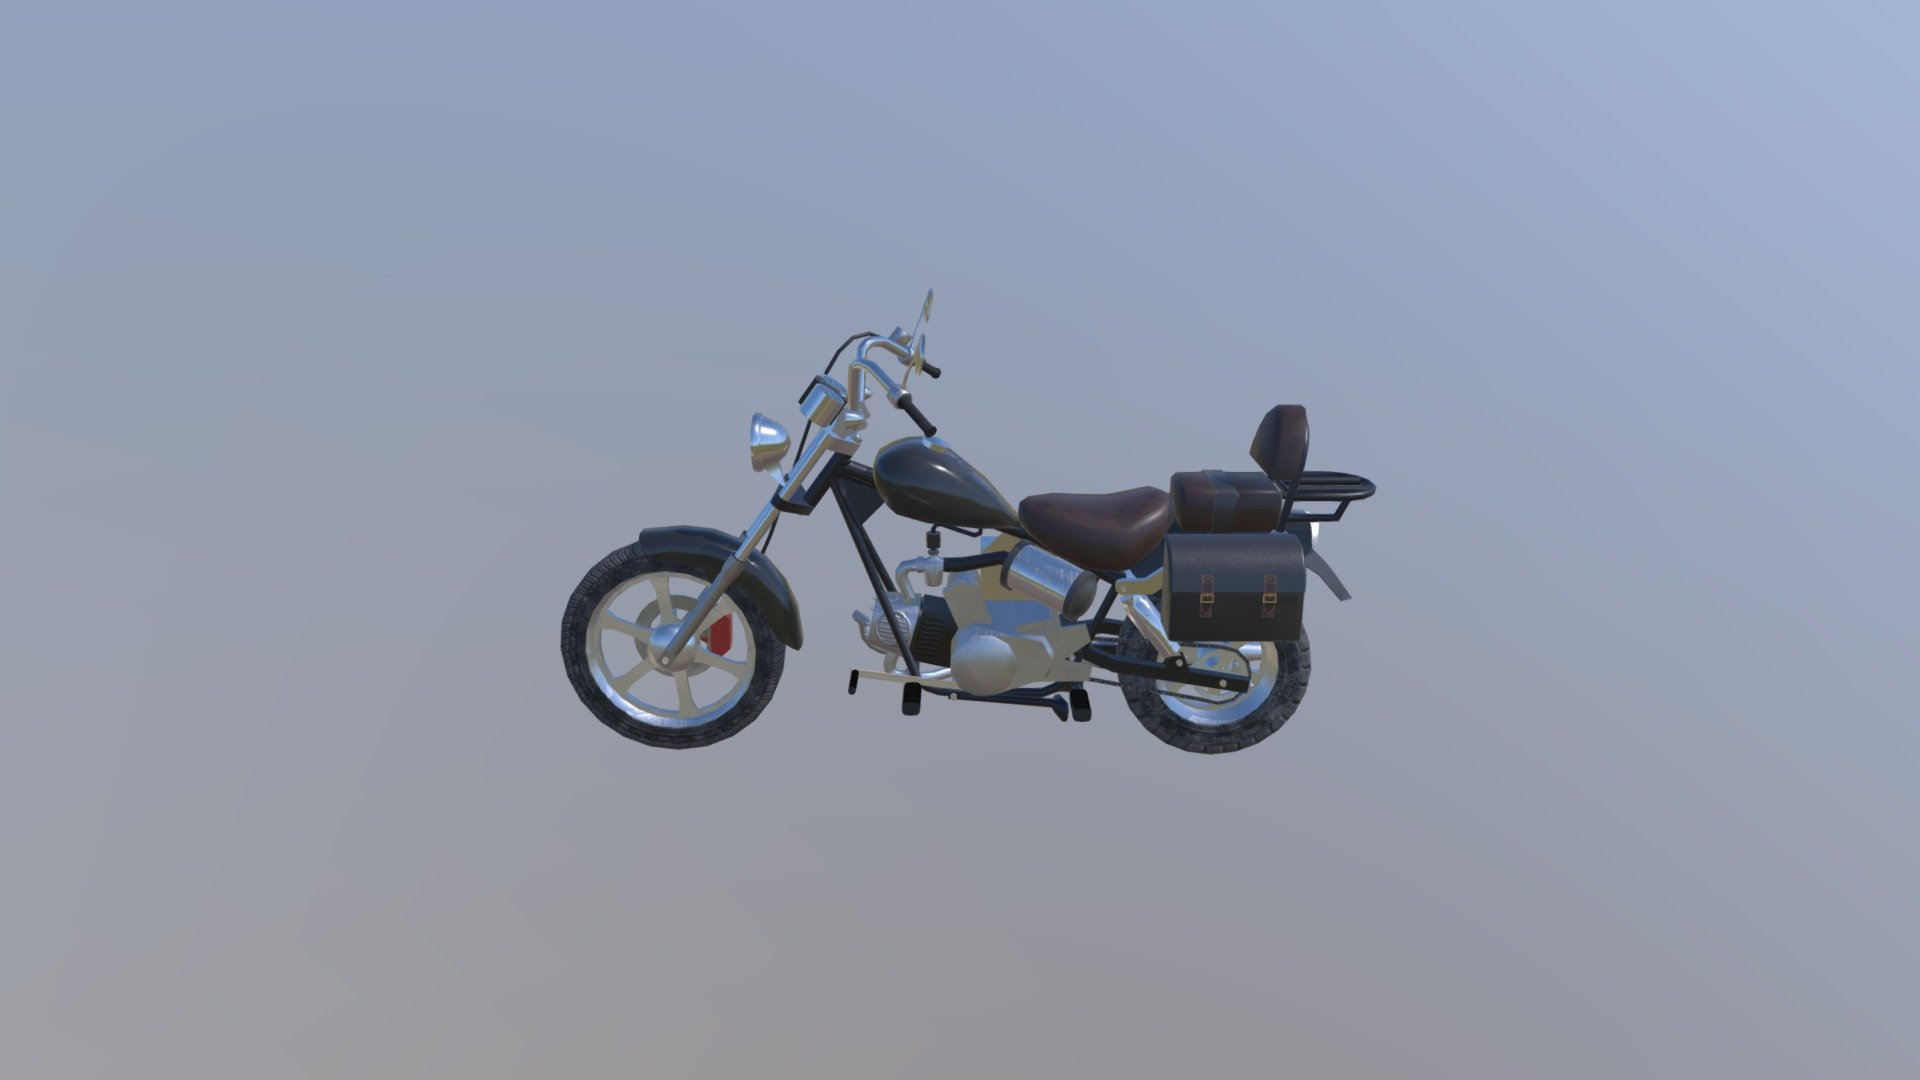 Moped, motorcycle.